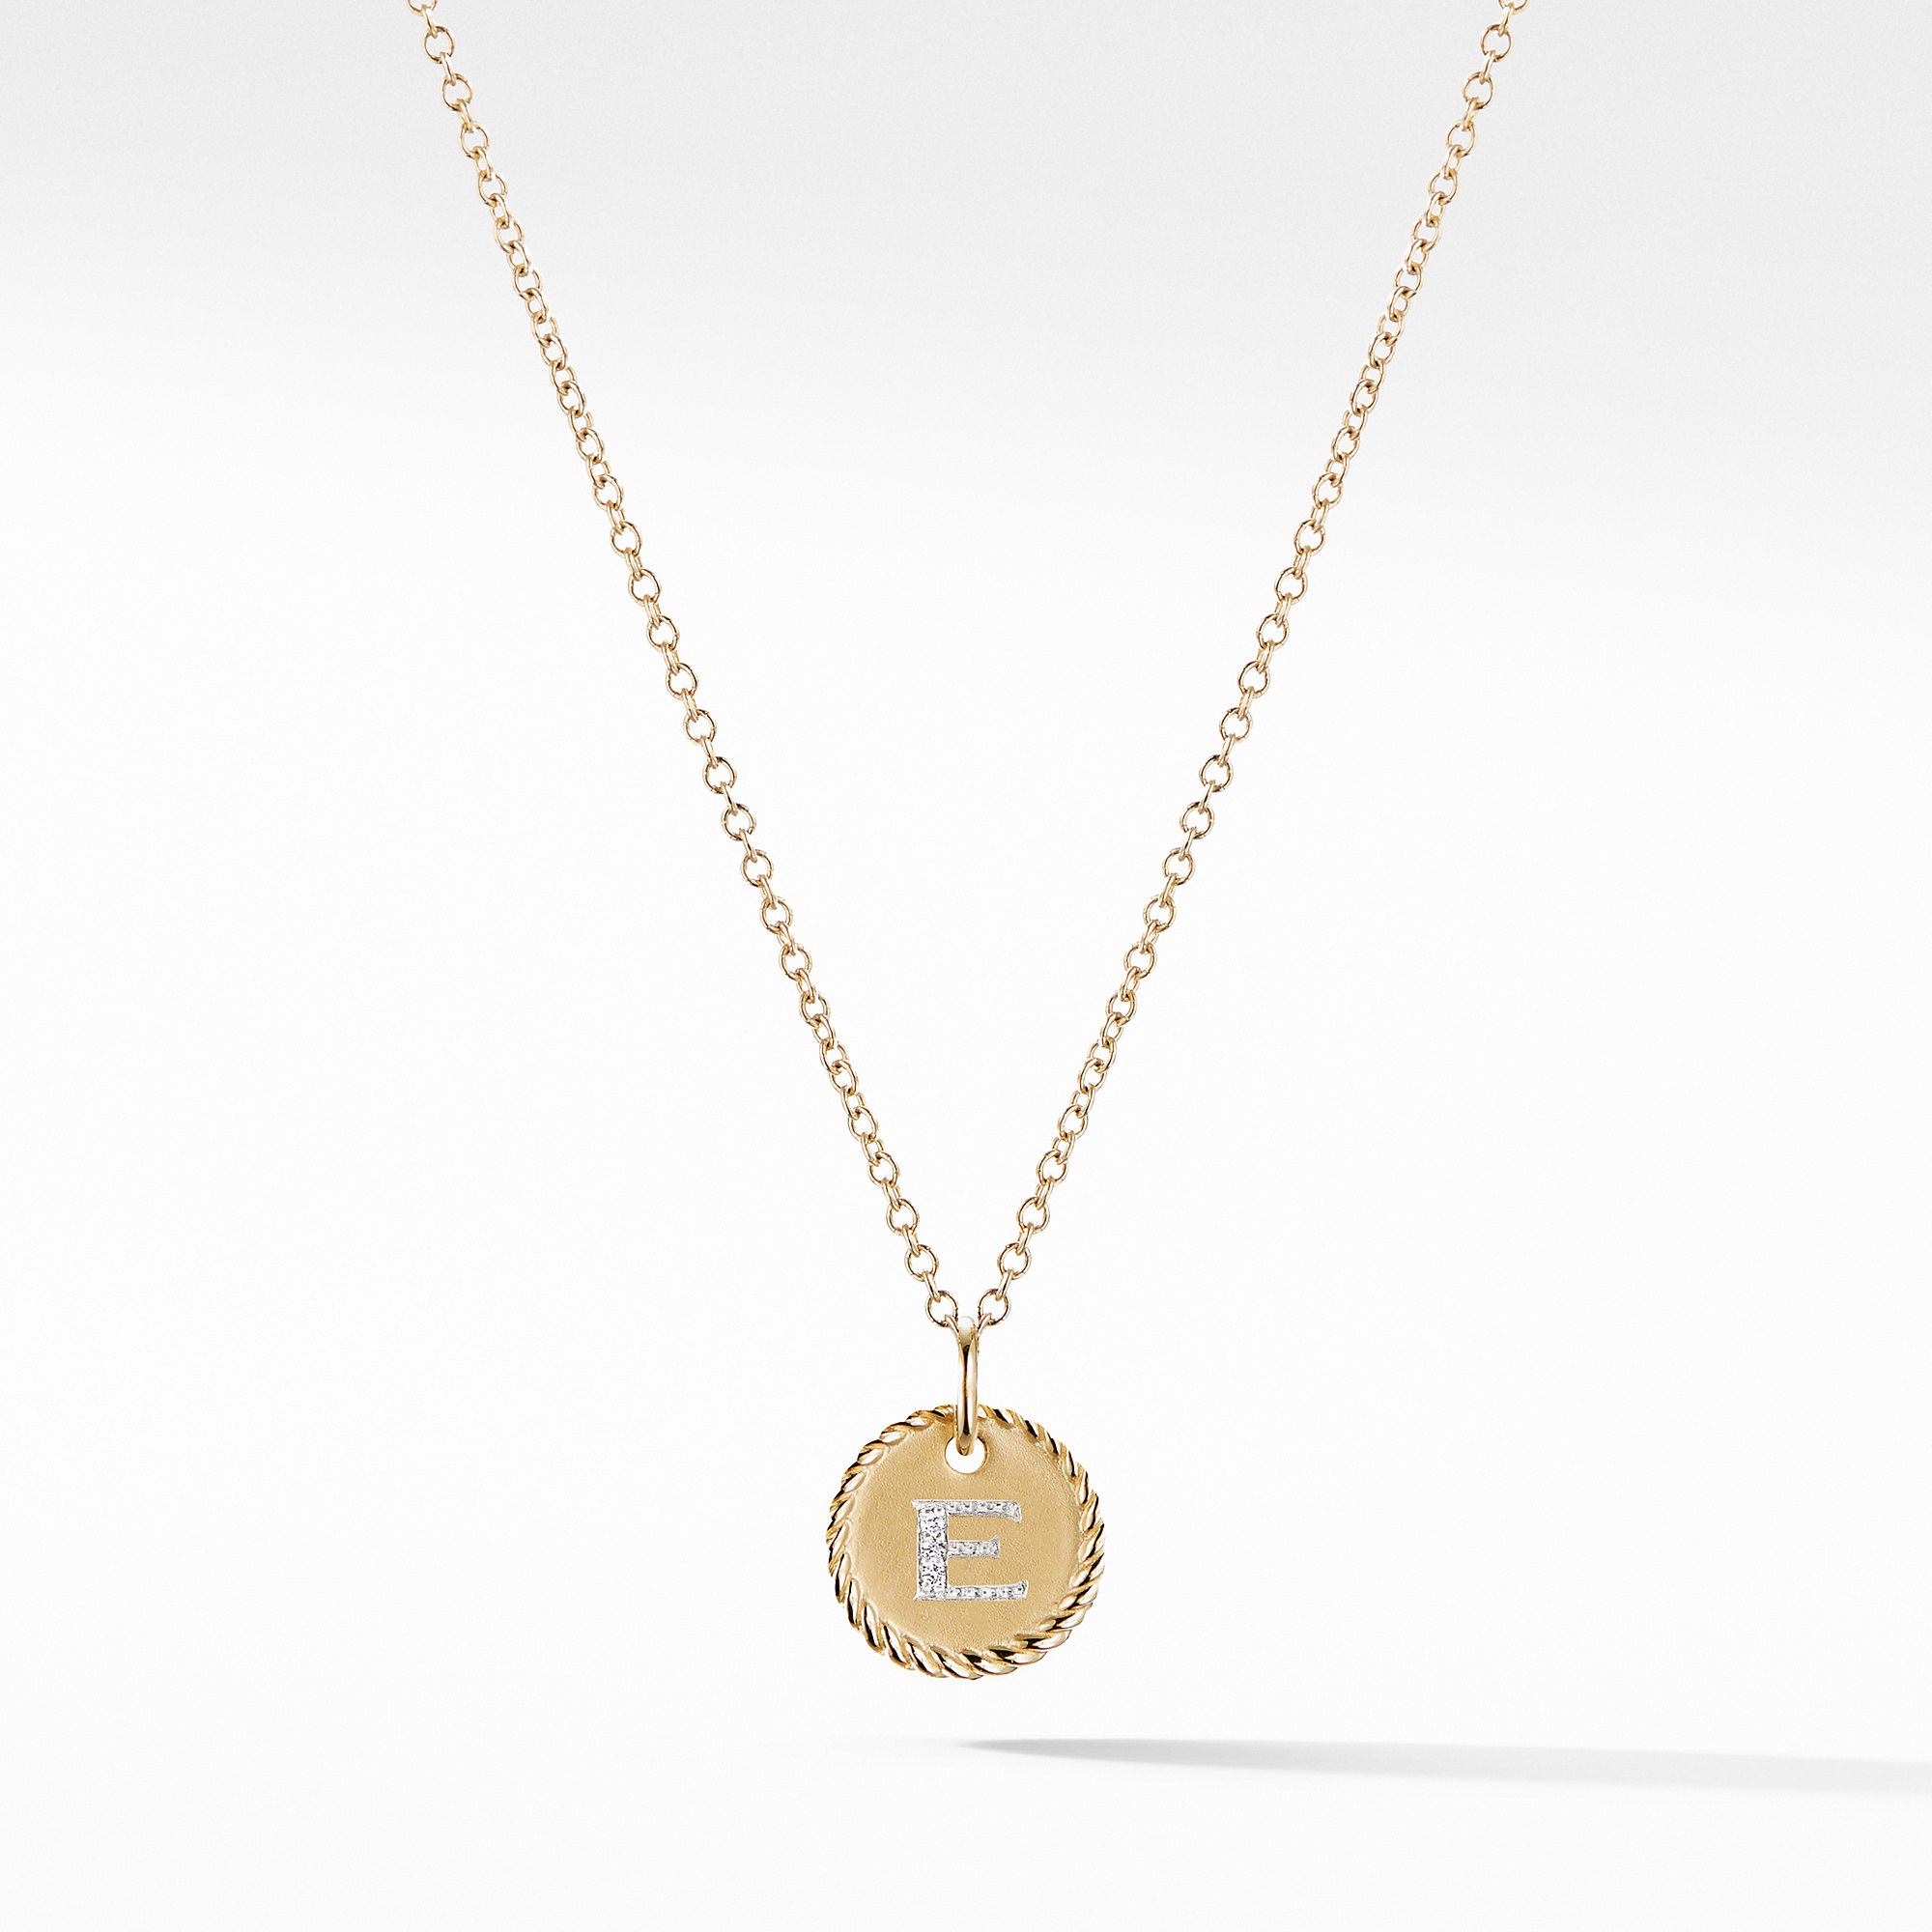 David Yurman "E" initial Charm Necklace with Diamonds in Yellow Gold 0